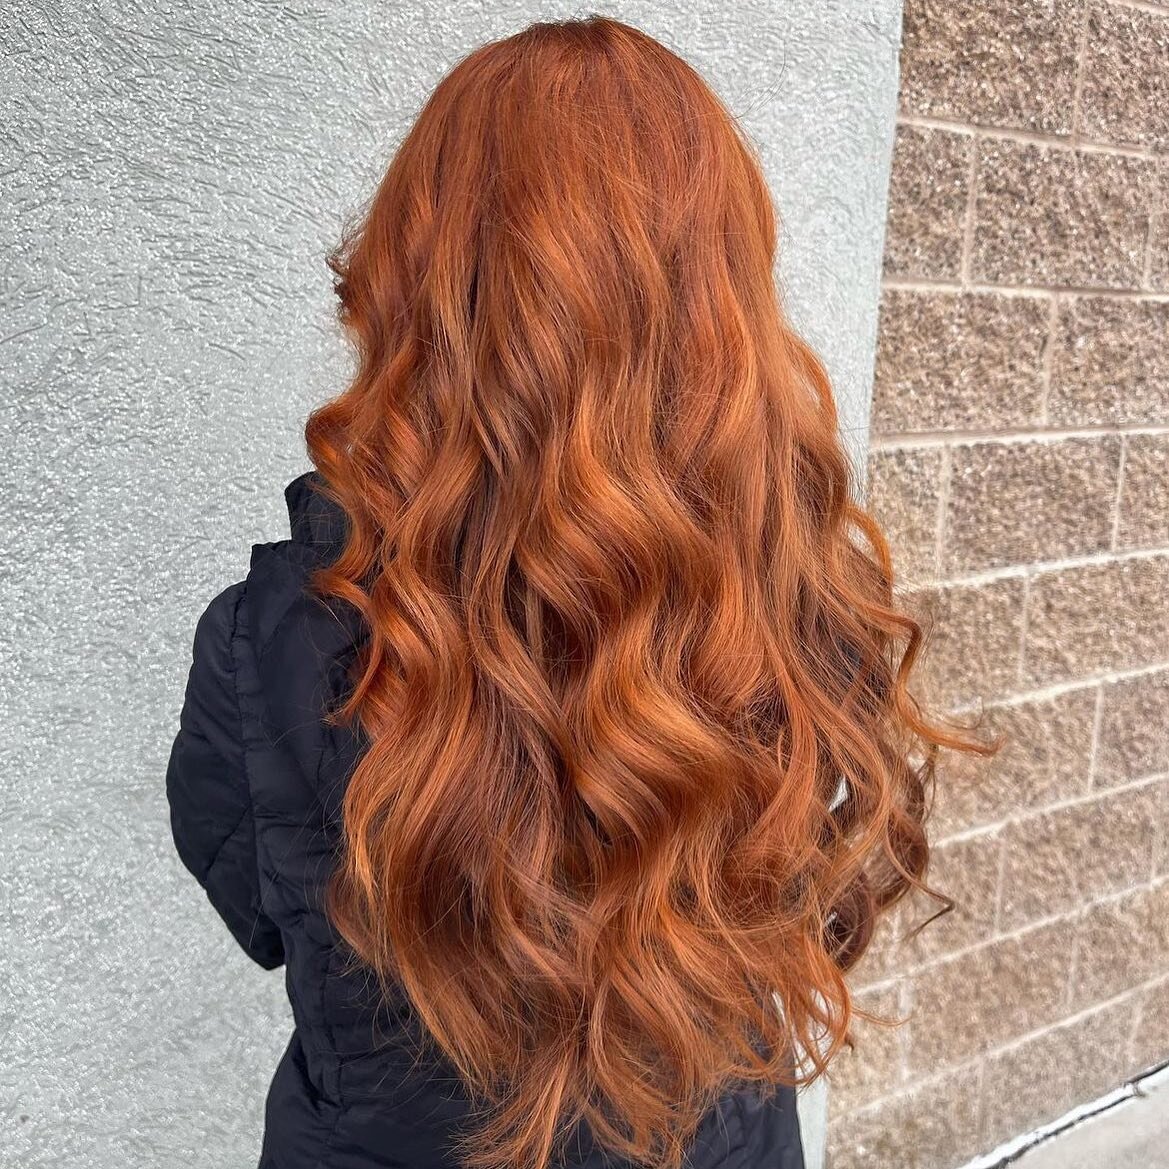 Can you even?! First time going RED for this lady&hellip; and Wow is all we can say! Reds can be tricky, but we do them right at #moorehairdesign Cut and color by Abbie @abbiemarie.beautie 

Come see us soon for your Spring time transformations&helli